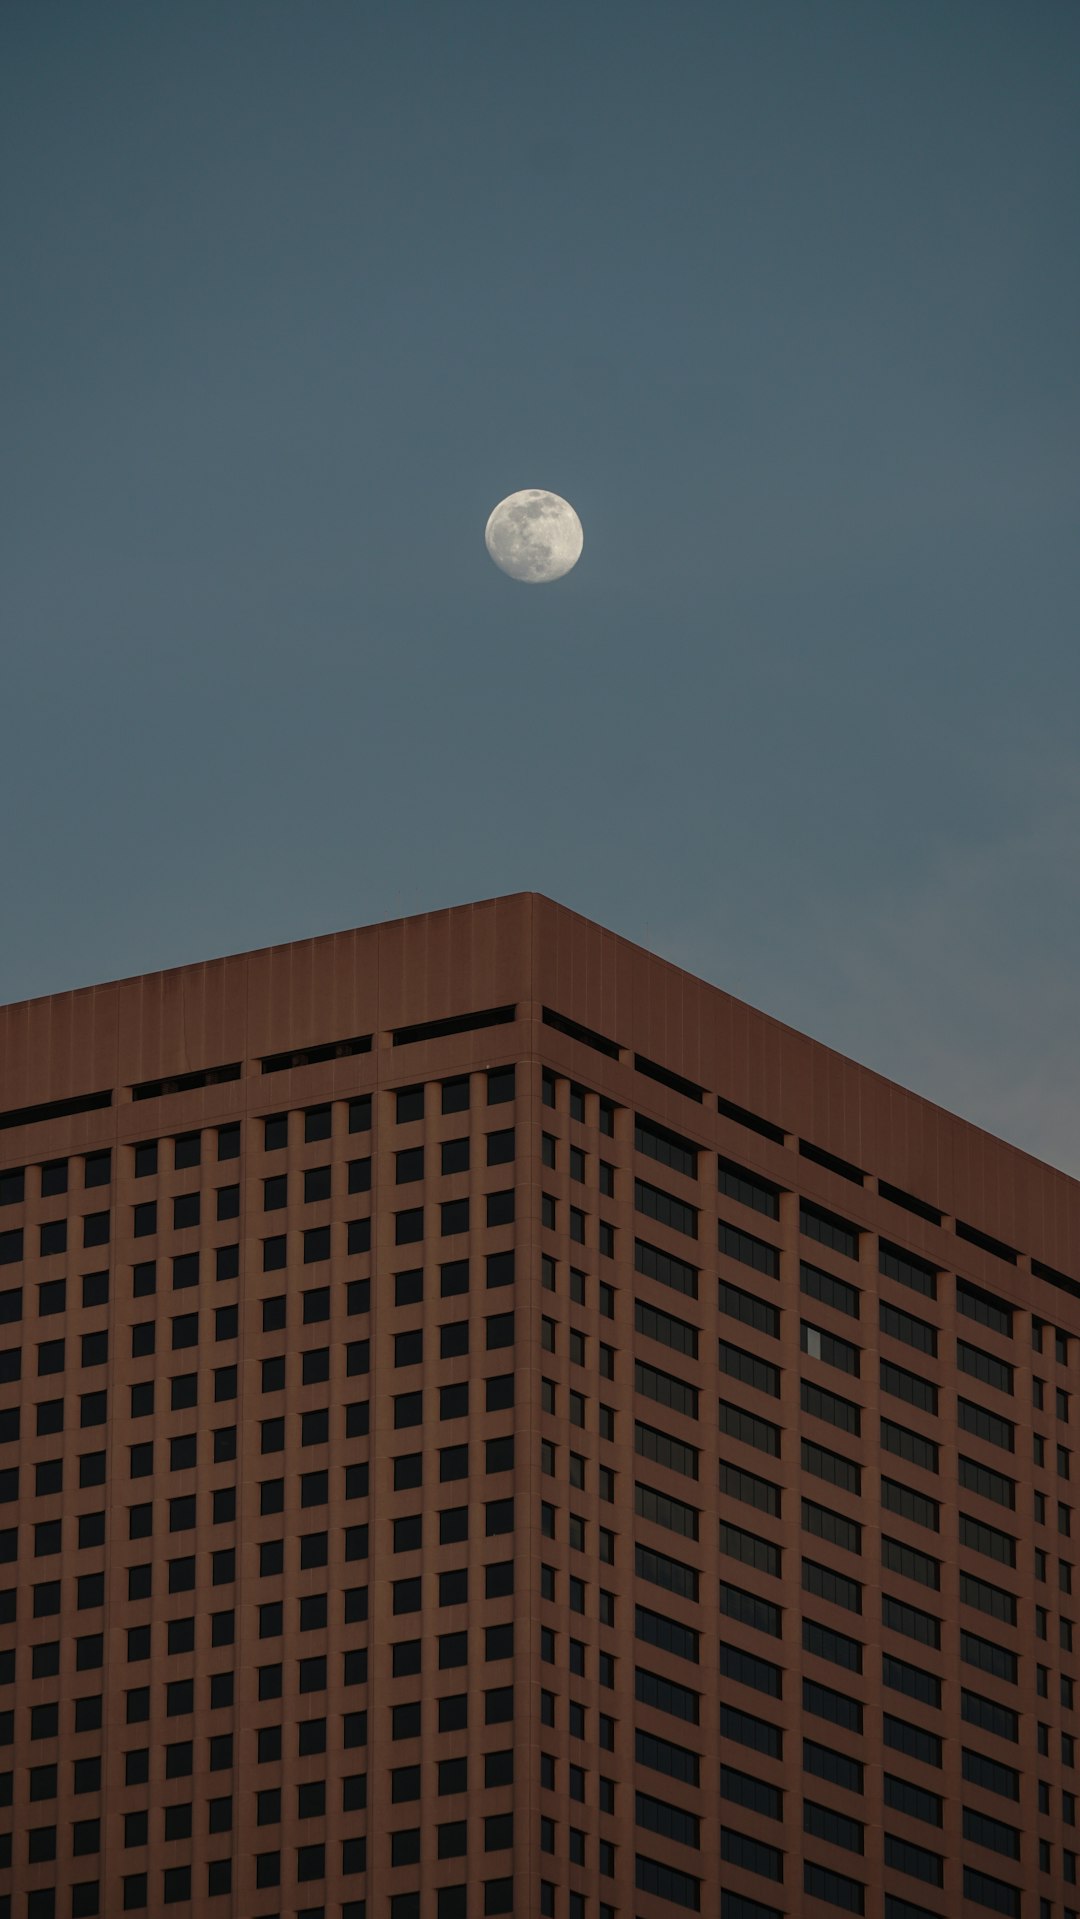 full moon over brown building